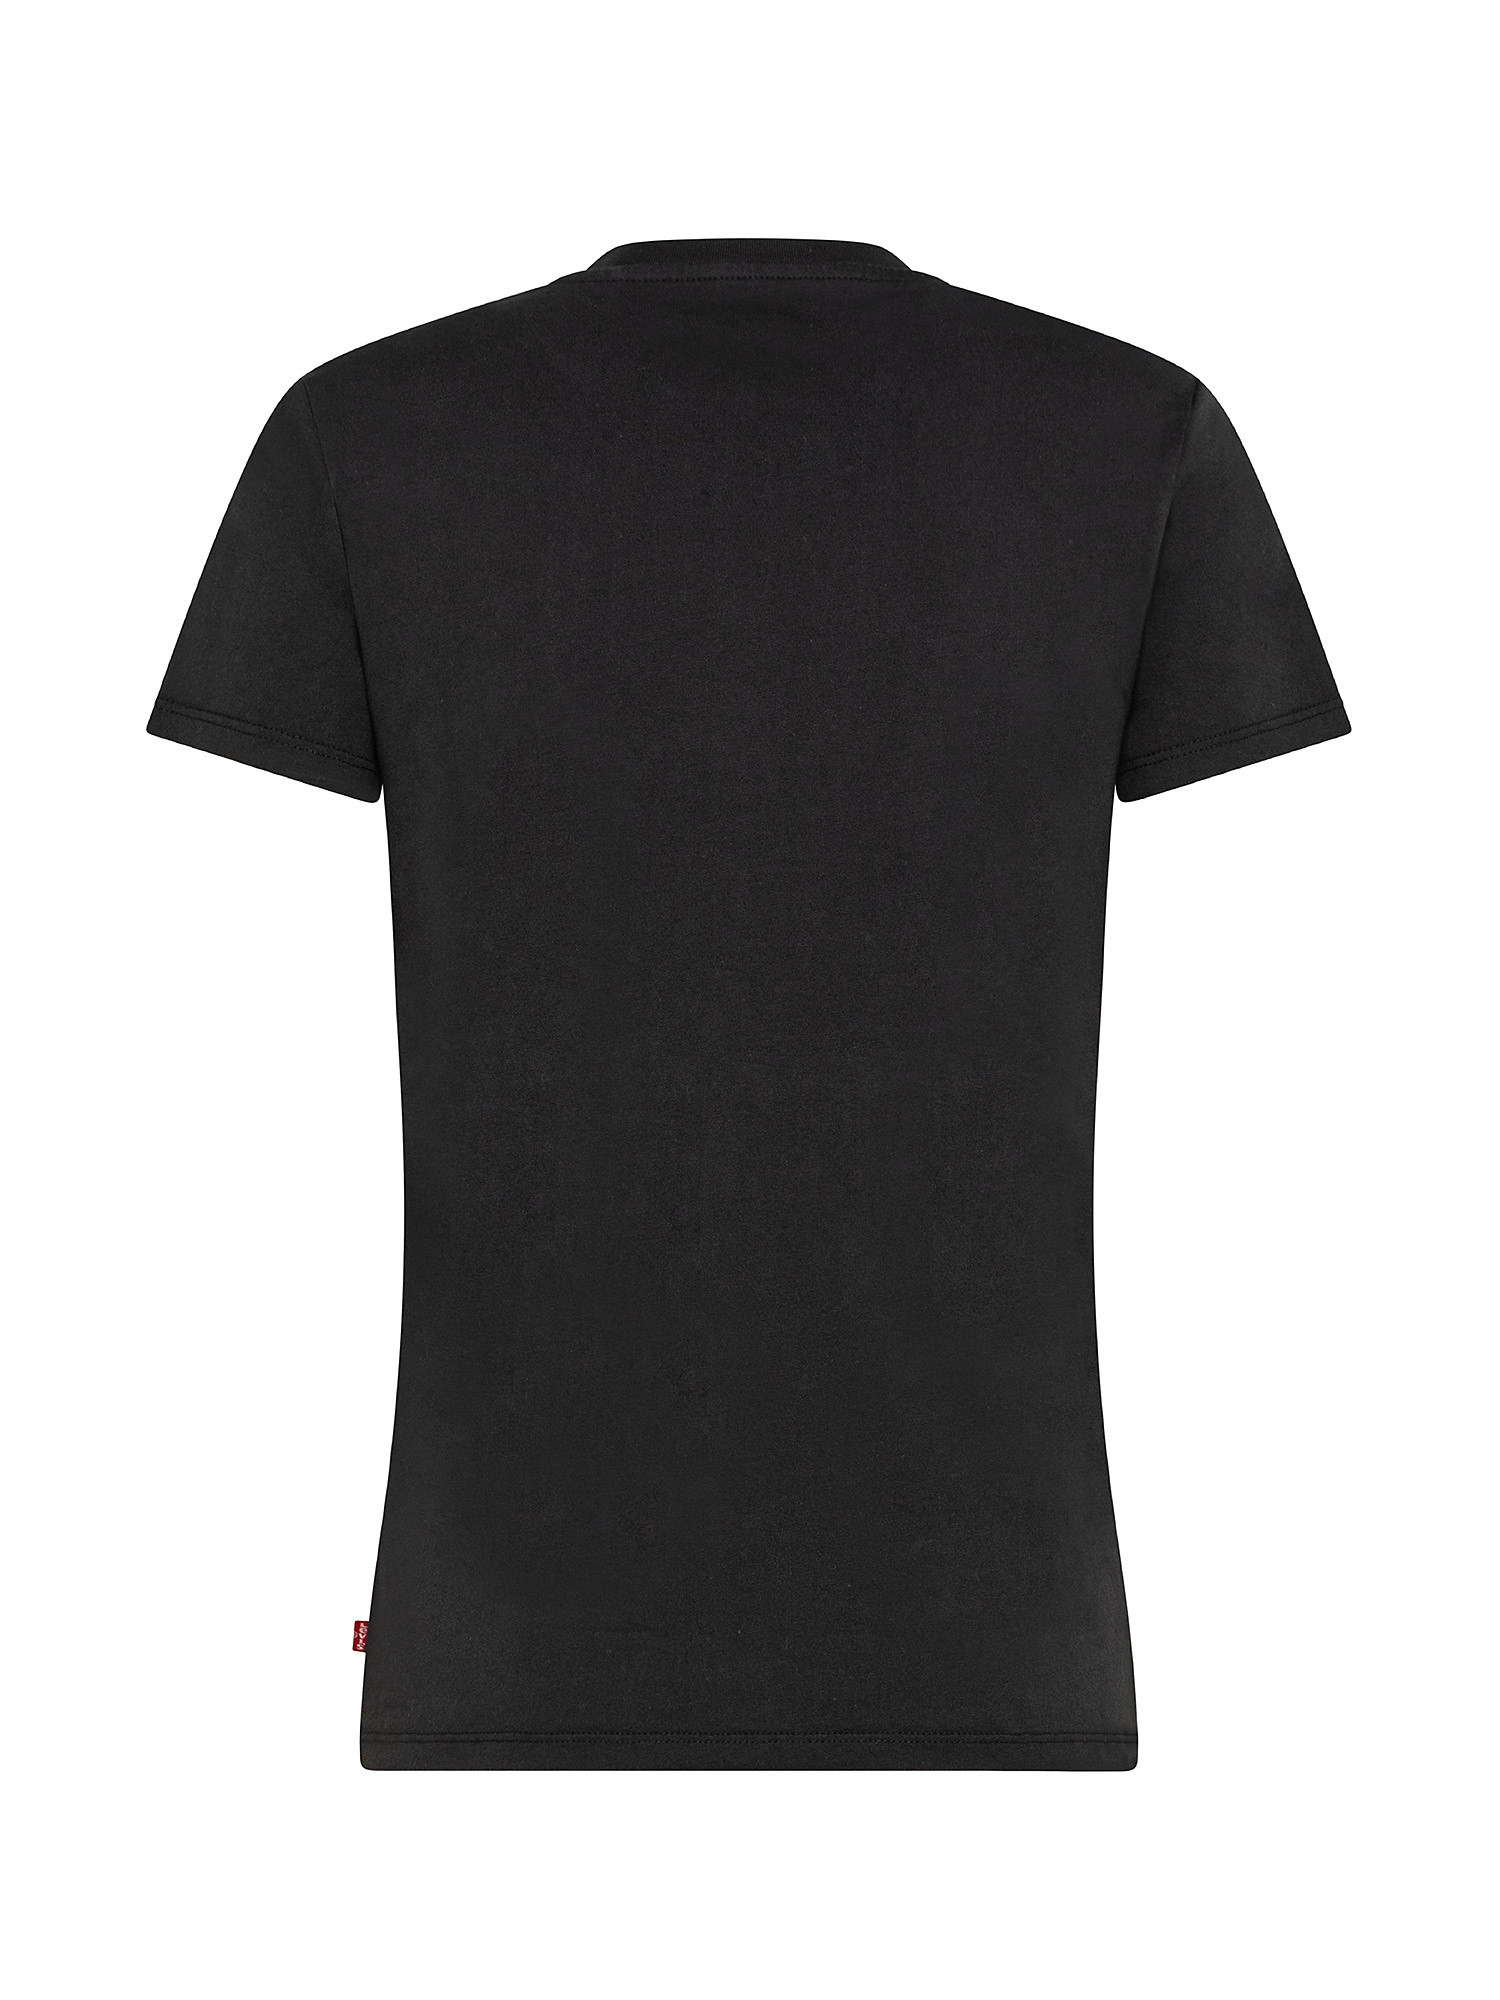 T-shirt Perfect Tee, Nero, large image number 1